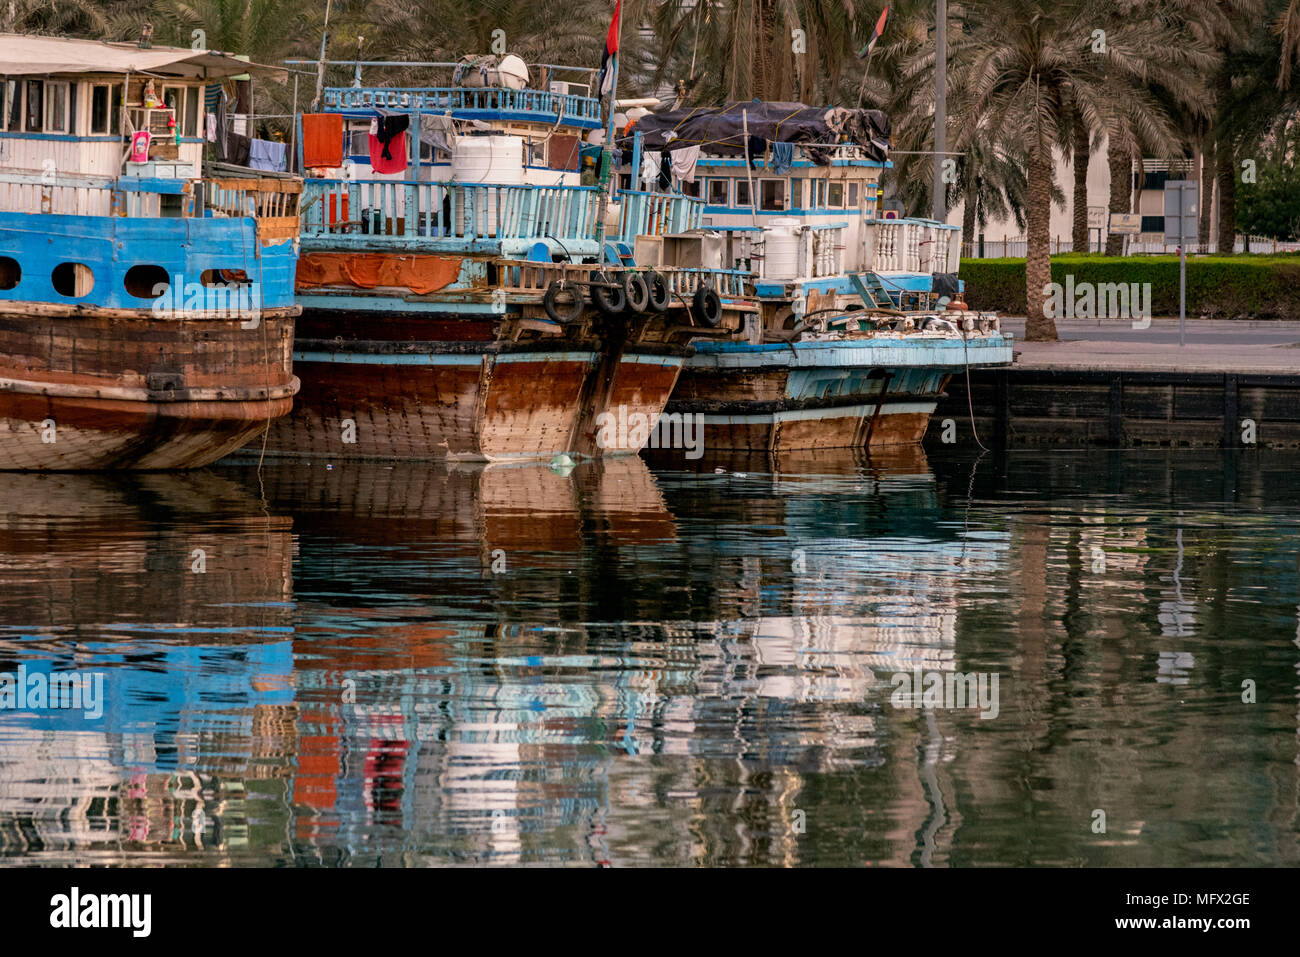 Boats at Port  along Deira's shore of Dubai Creek, UAE. Deira is an old commercial center of Dubai with small shipping and trade boats. Stock Photo